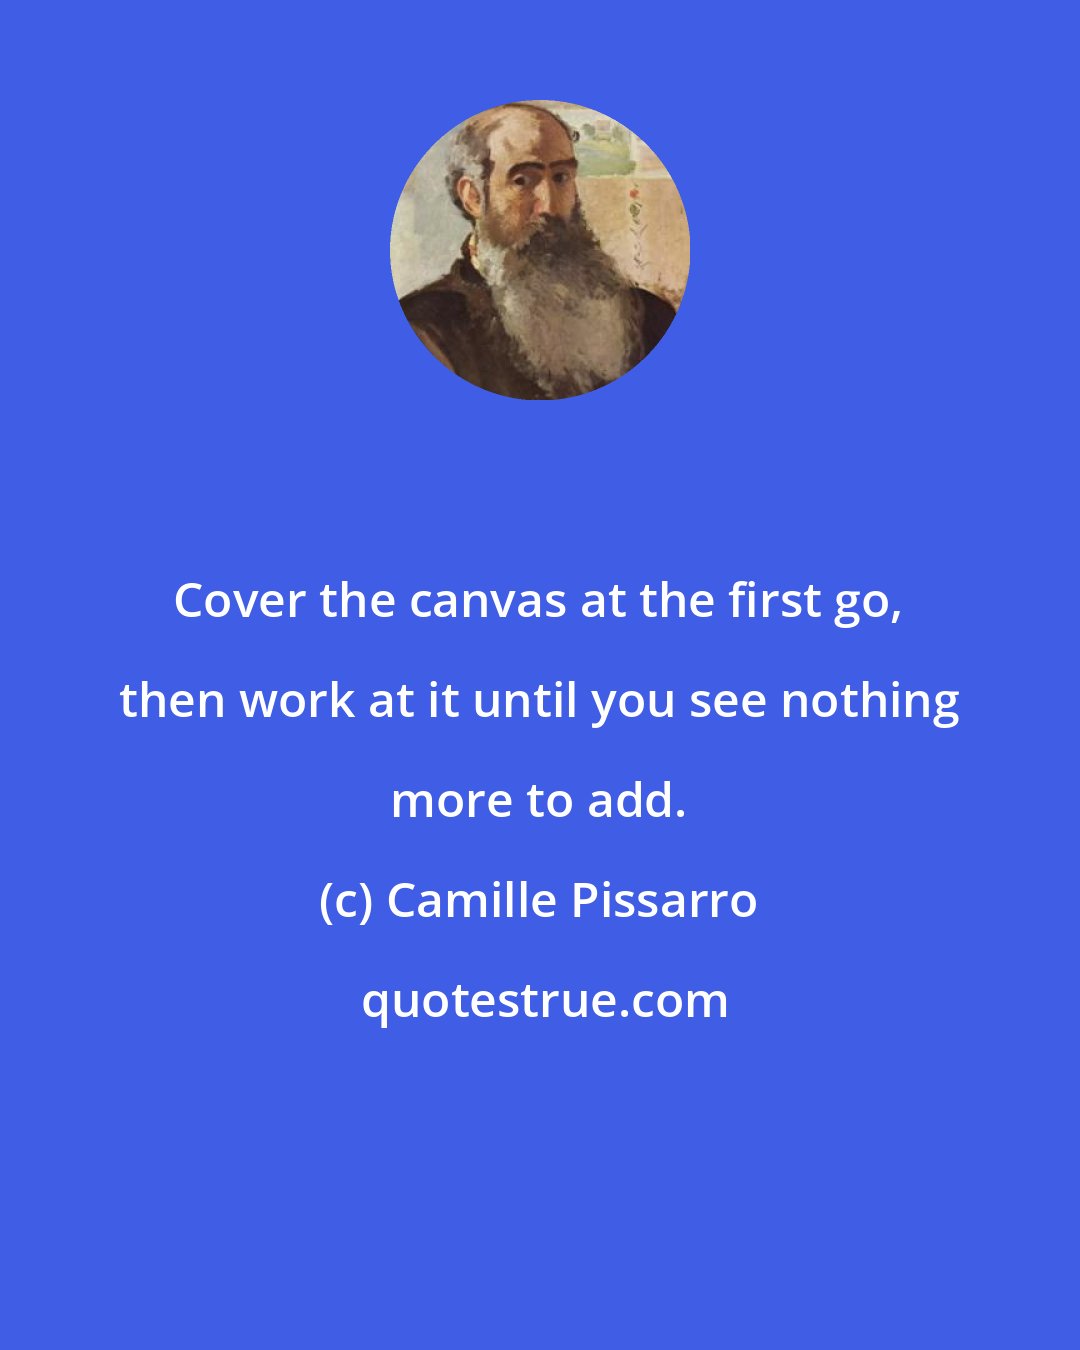 Camille Pissarro: Cover the canvas at the first go, then work at it until you see nothing more to add.